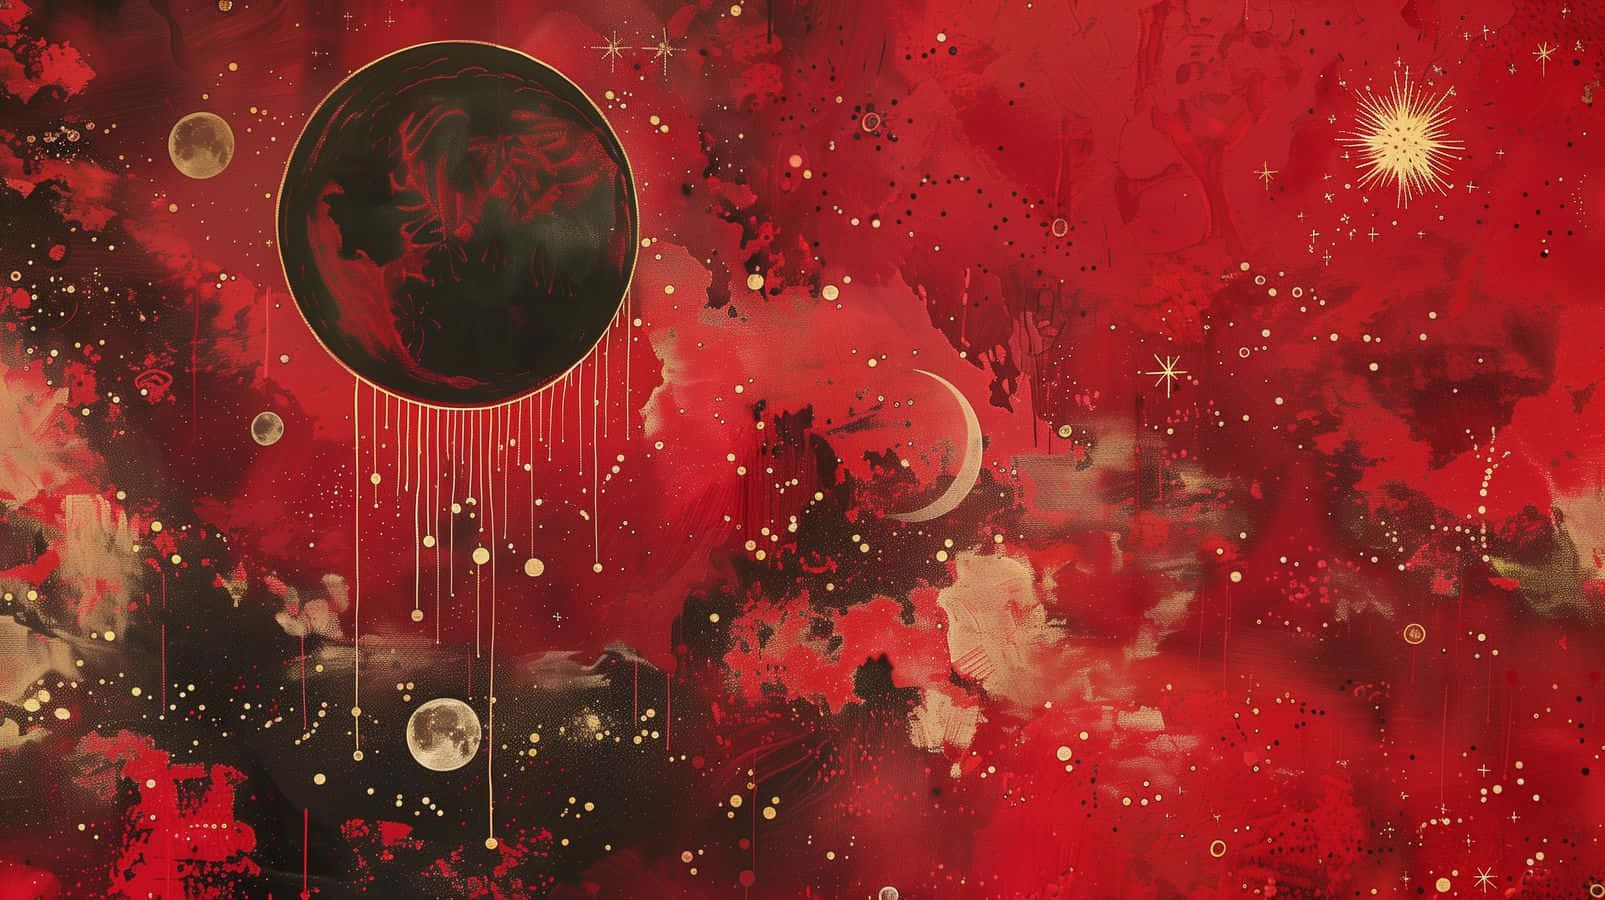 Celestial_ Red_ Aesthetic_ Abstract Wallpaper